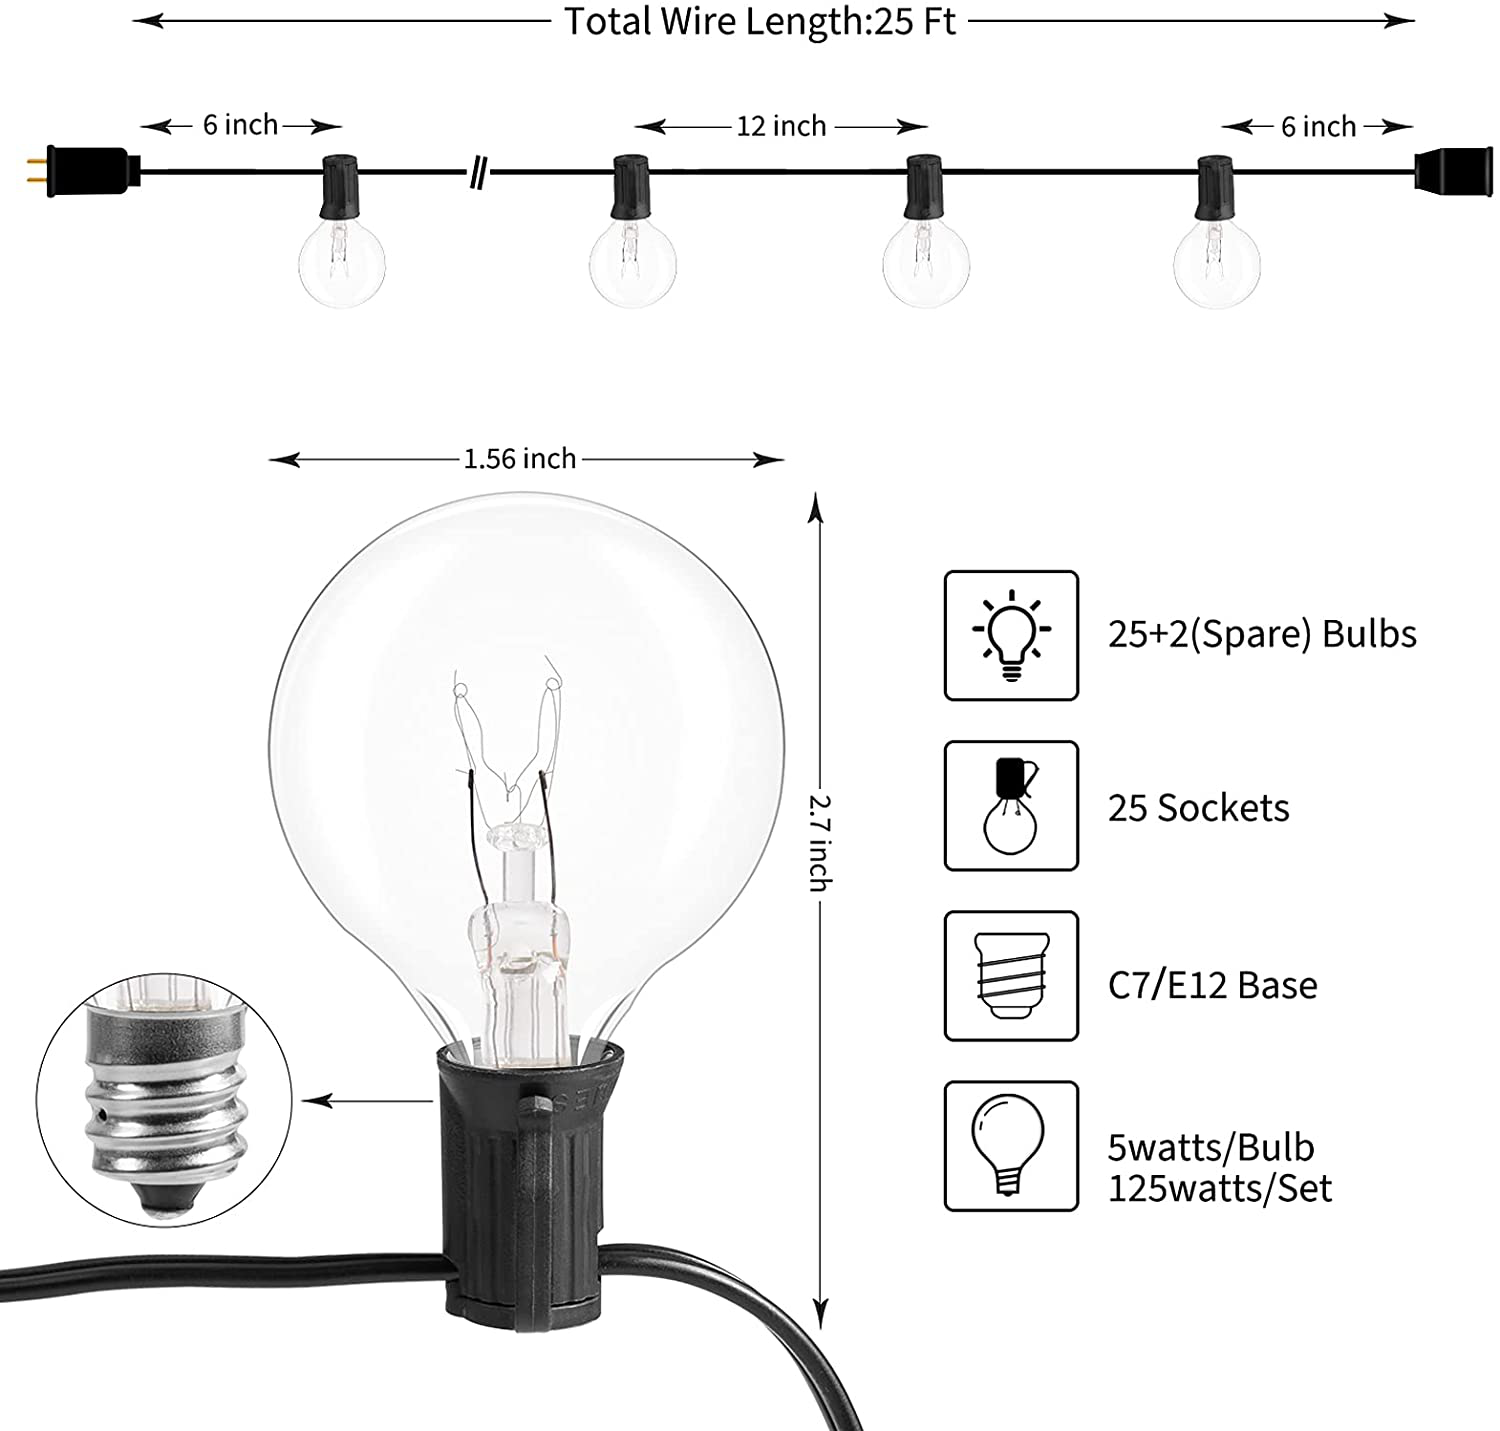 Outdoor String Lights G40 Globe Patio Lights with 27 Edison Glass Bulbs(2 Spare), Waterproof Connectable Hanging Light for Backyard Porch Balcony Party Decor, E12 Socket Base